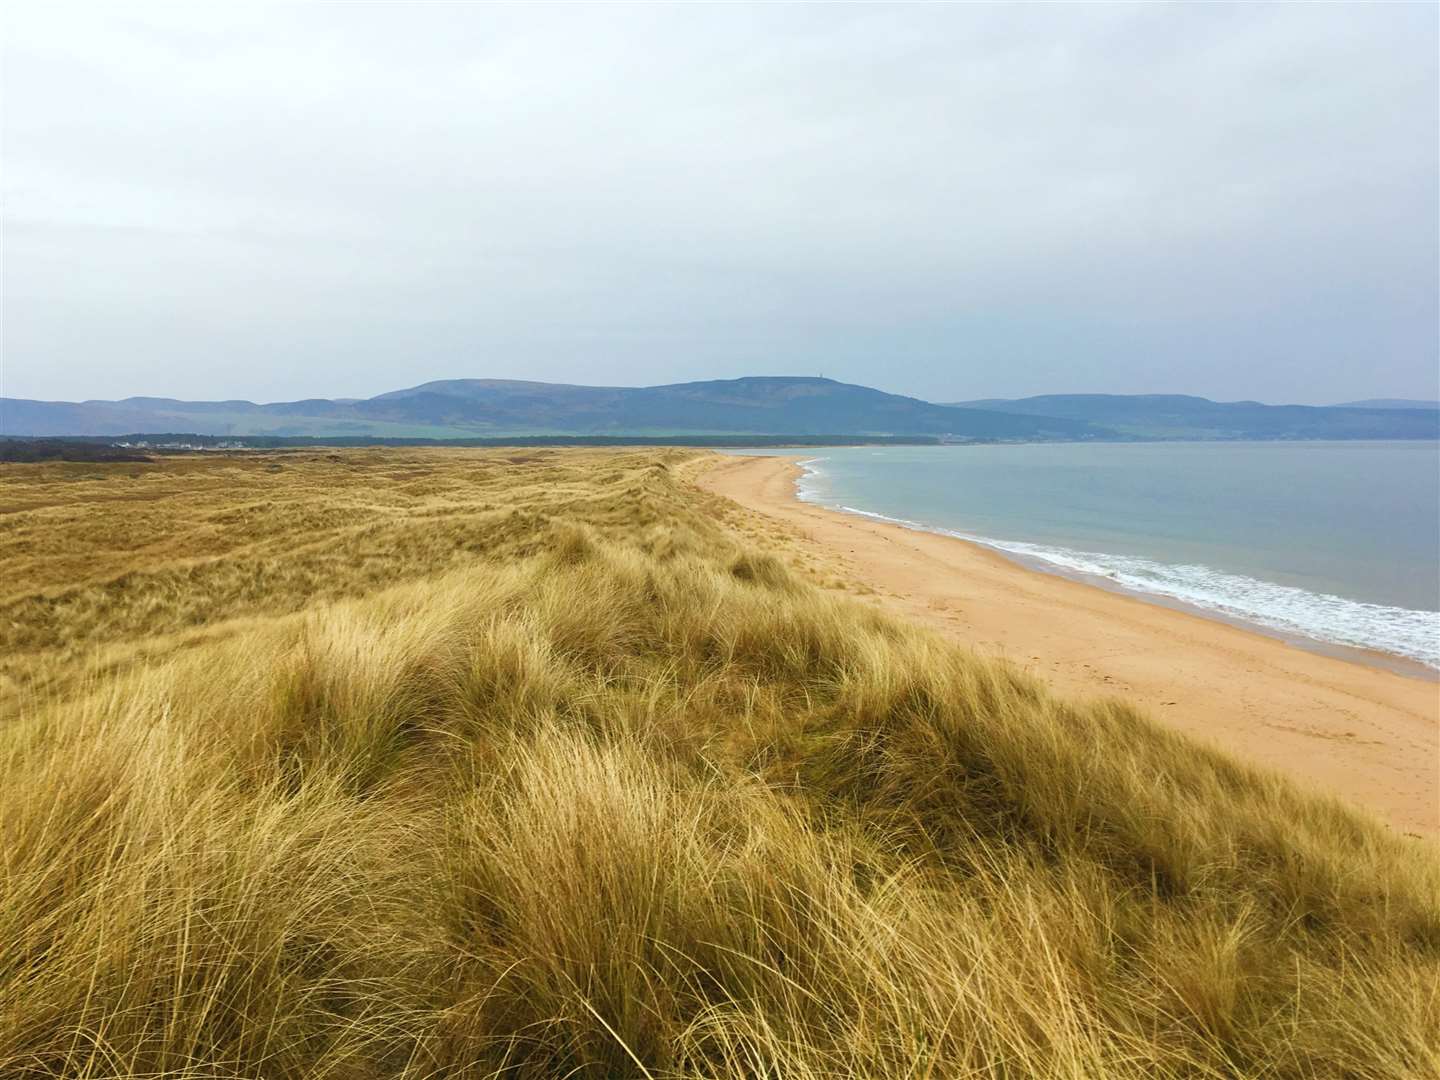 Coul Links’ dunes run alongside the Loch Fleet basin. The site is a Special Protection Area for birds and designated under the international Ramsar Convention on Wetlands. Part of the proposed course lies within Loch Fleet Site of Special Scientific Interest.